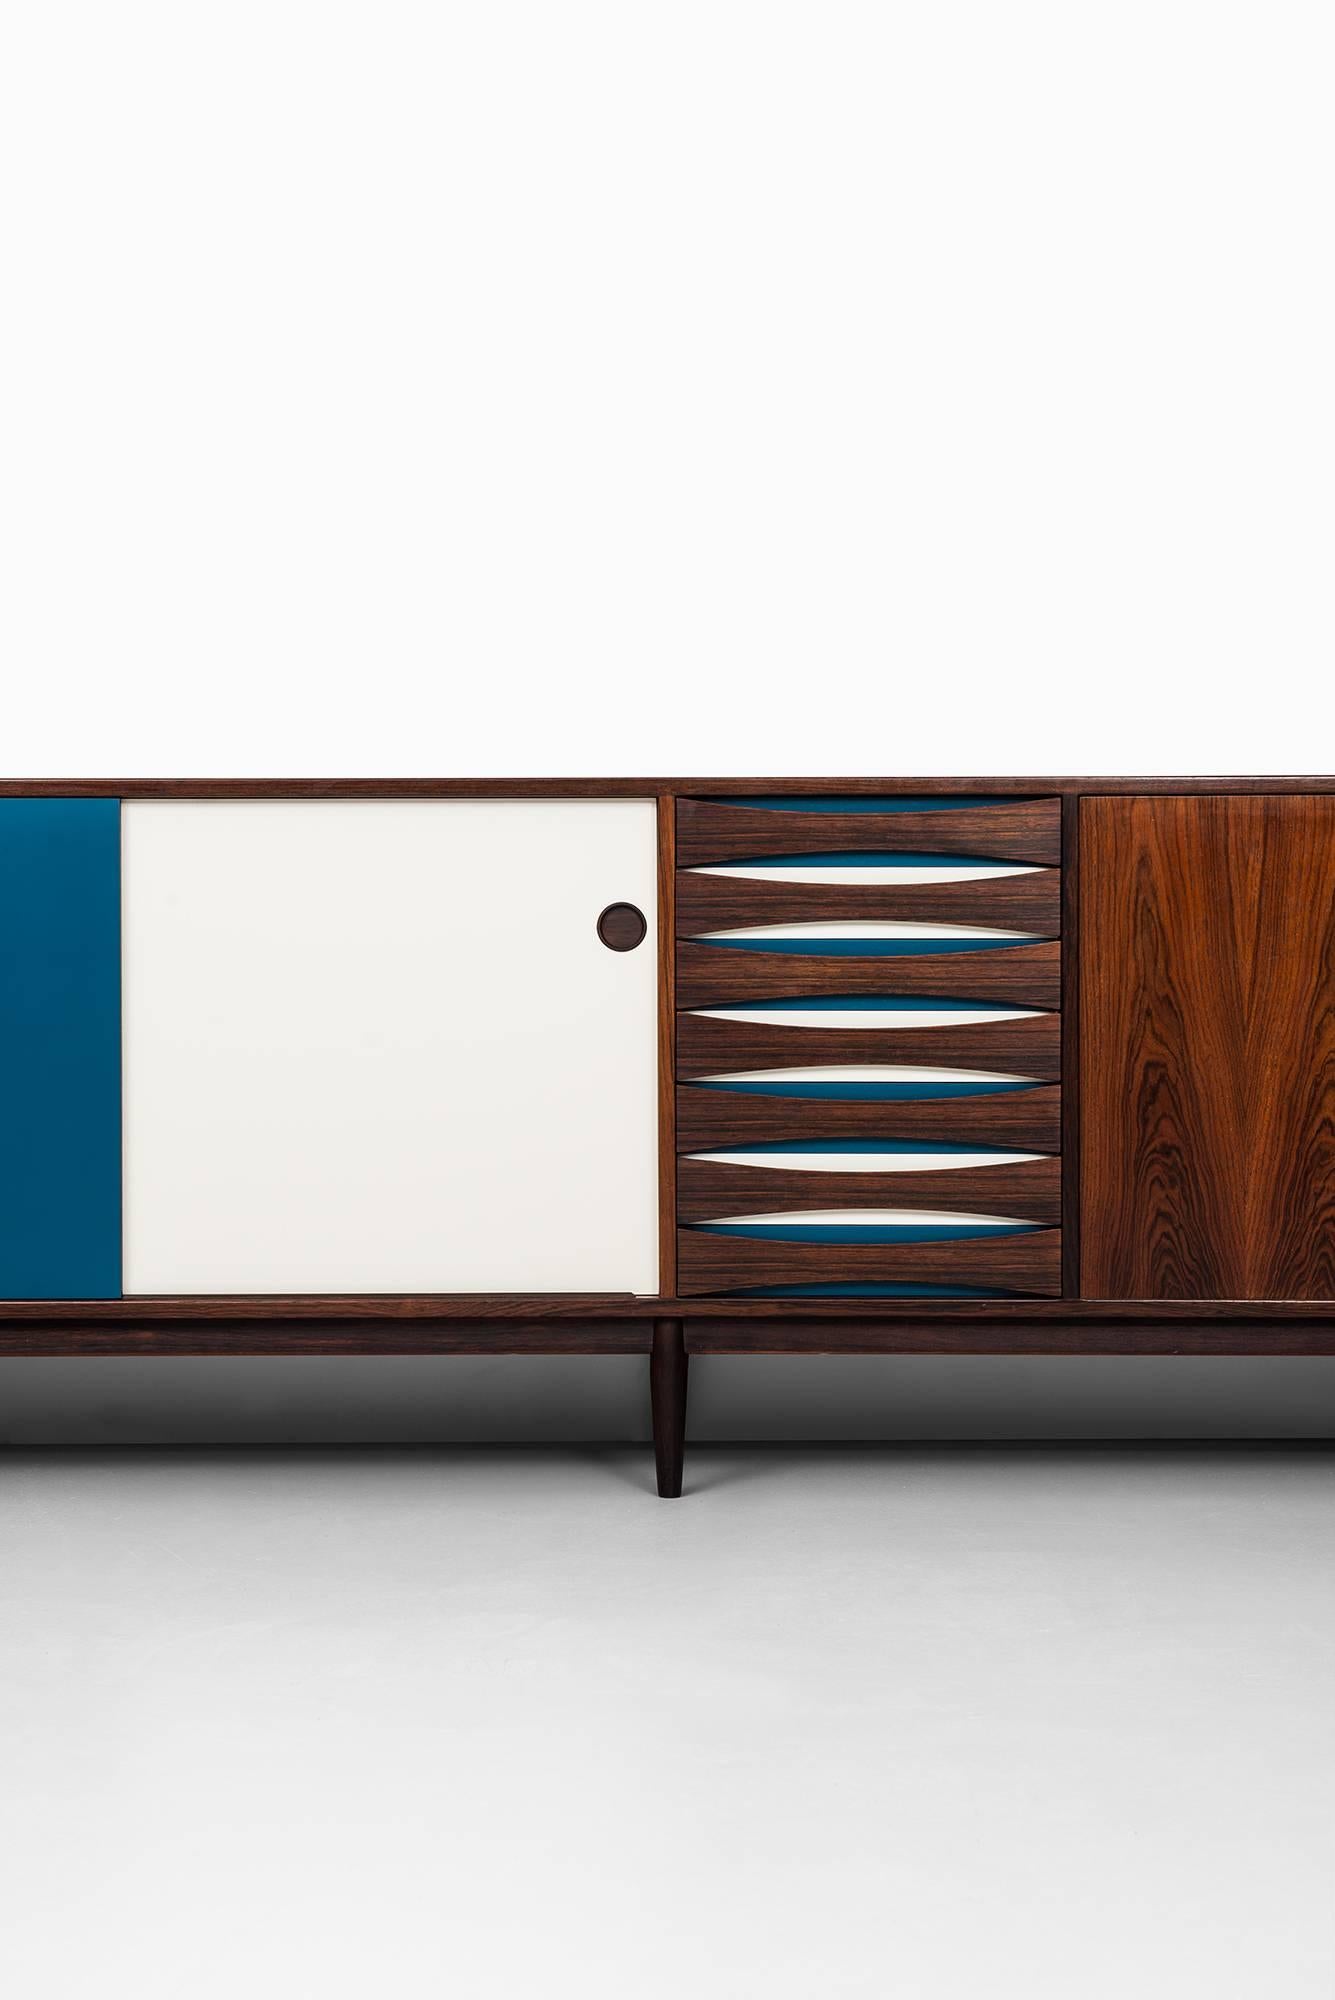 Very rare sideboard model 29A designed by Arne Vodder. Produced by Sibast in Denmark.